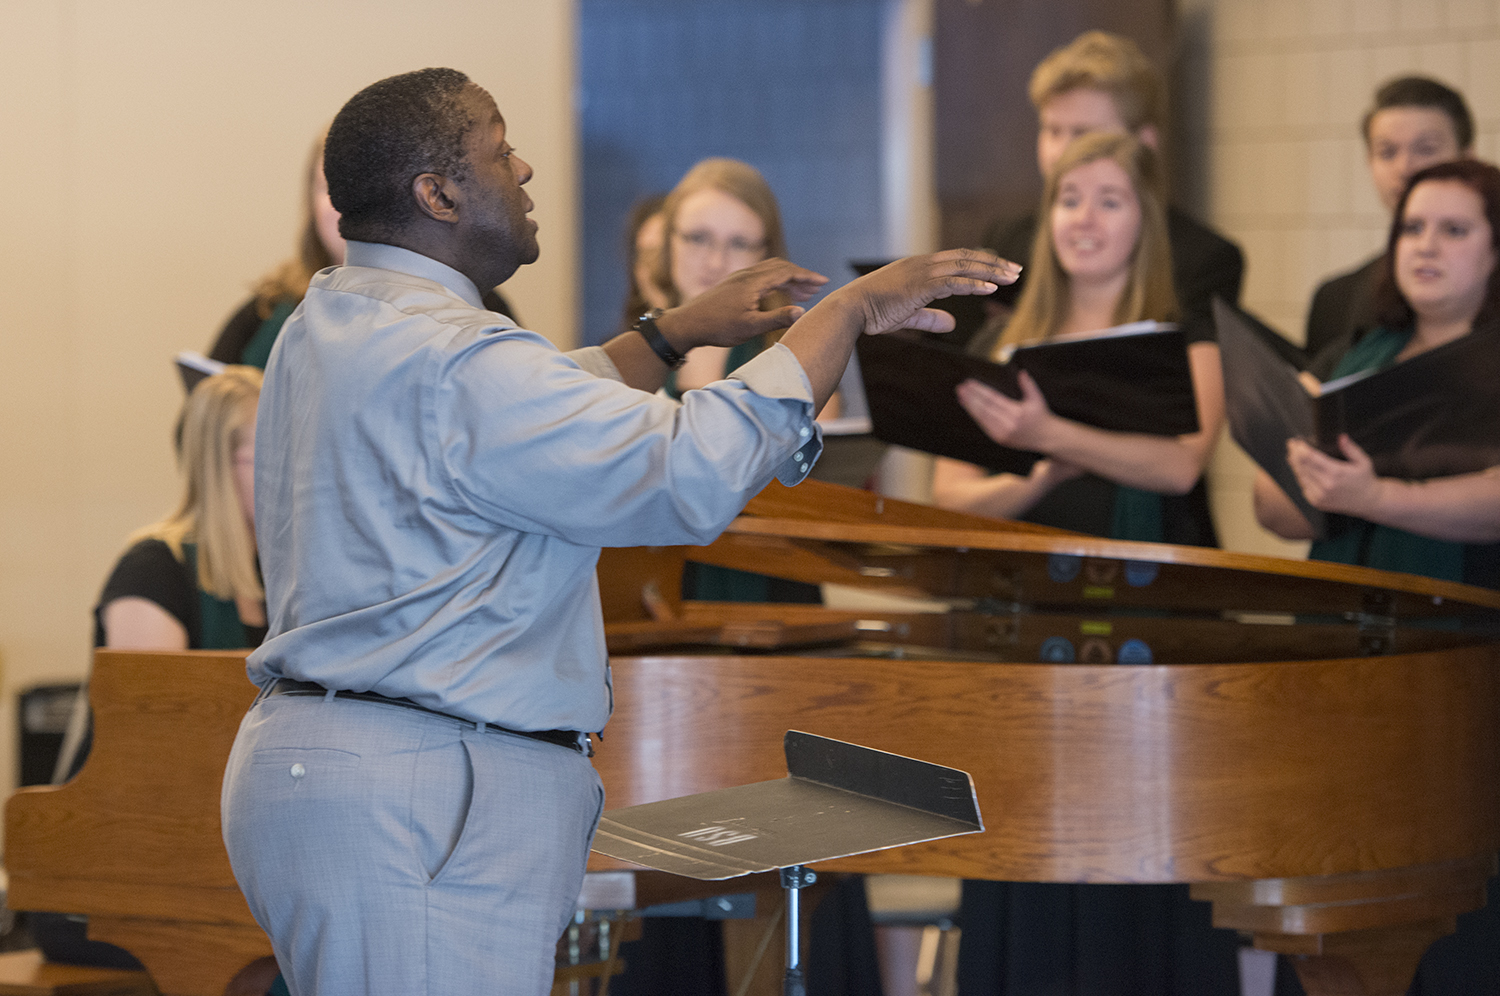 Dr. Jesse Grant, Associate Vice President of Student Life and Success, led the Bemidji Choir in "Life Every Voice and Sing."